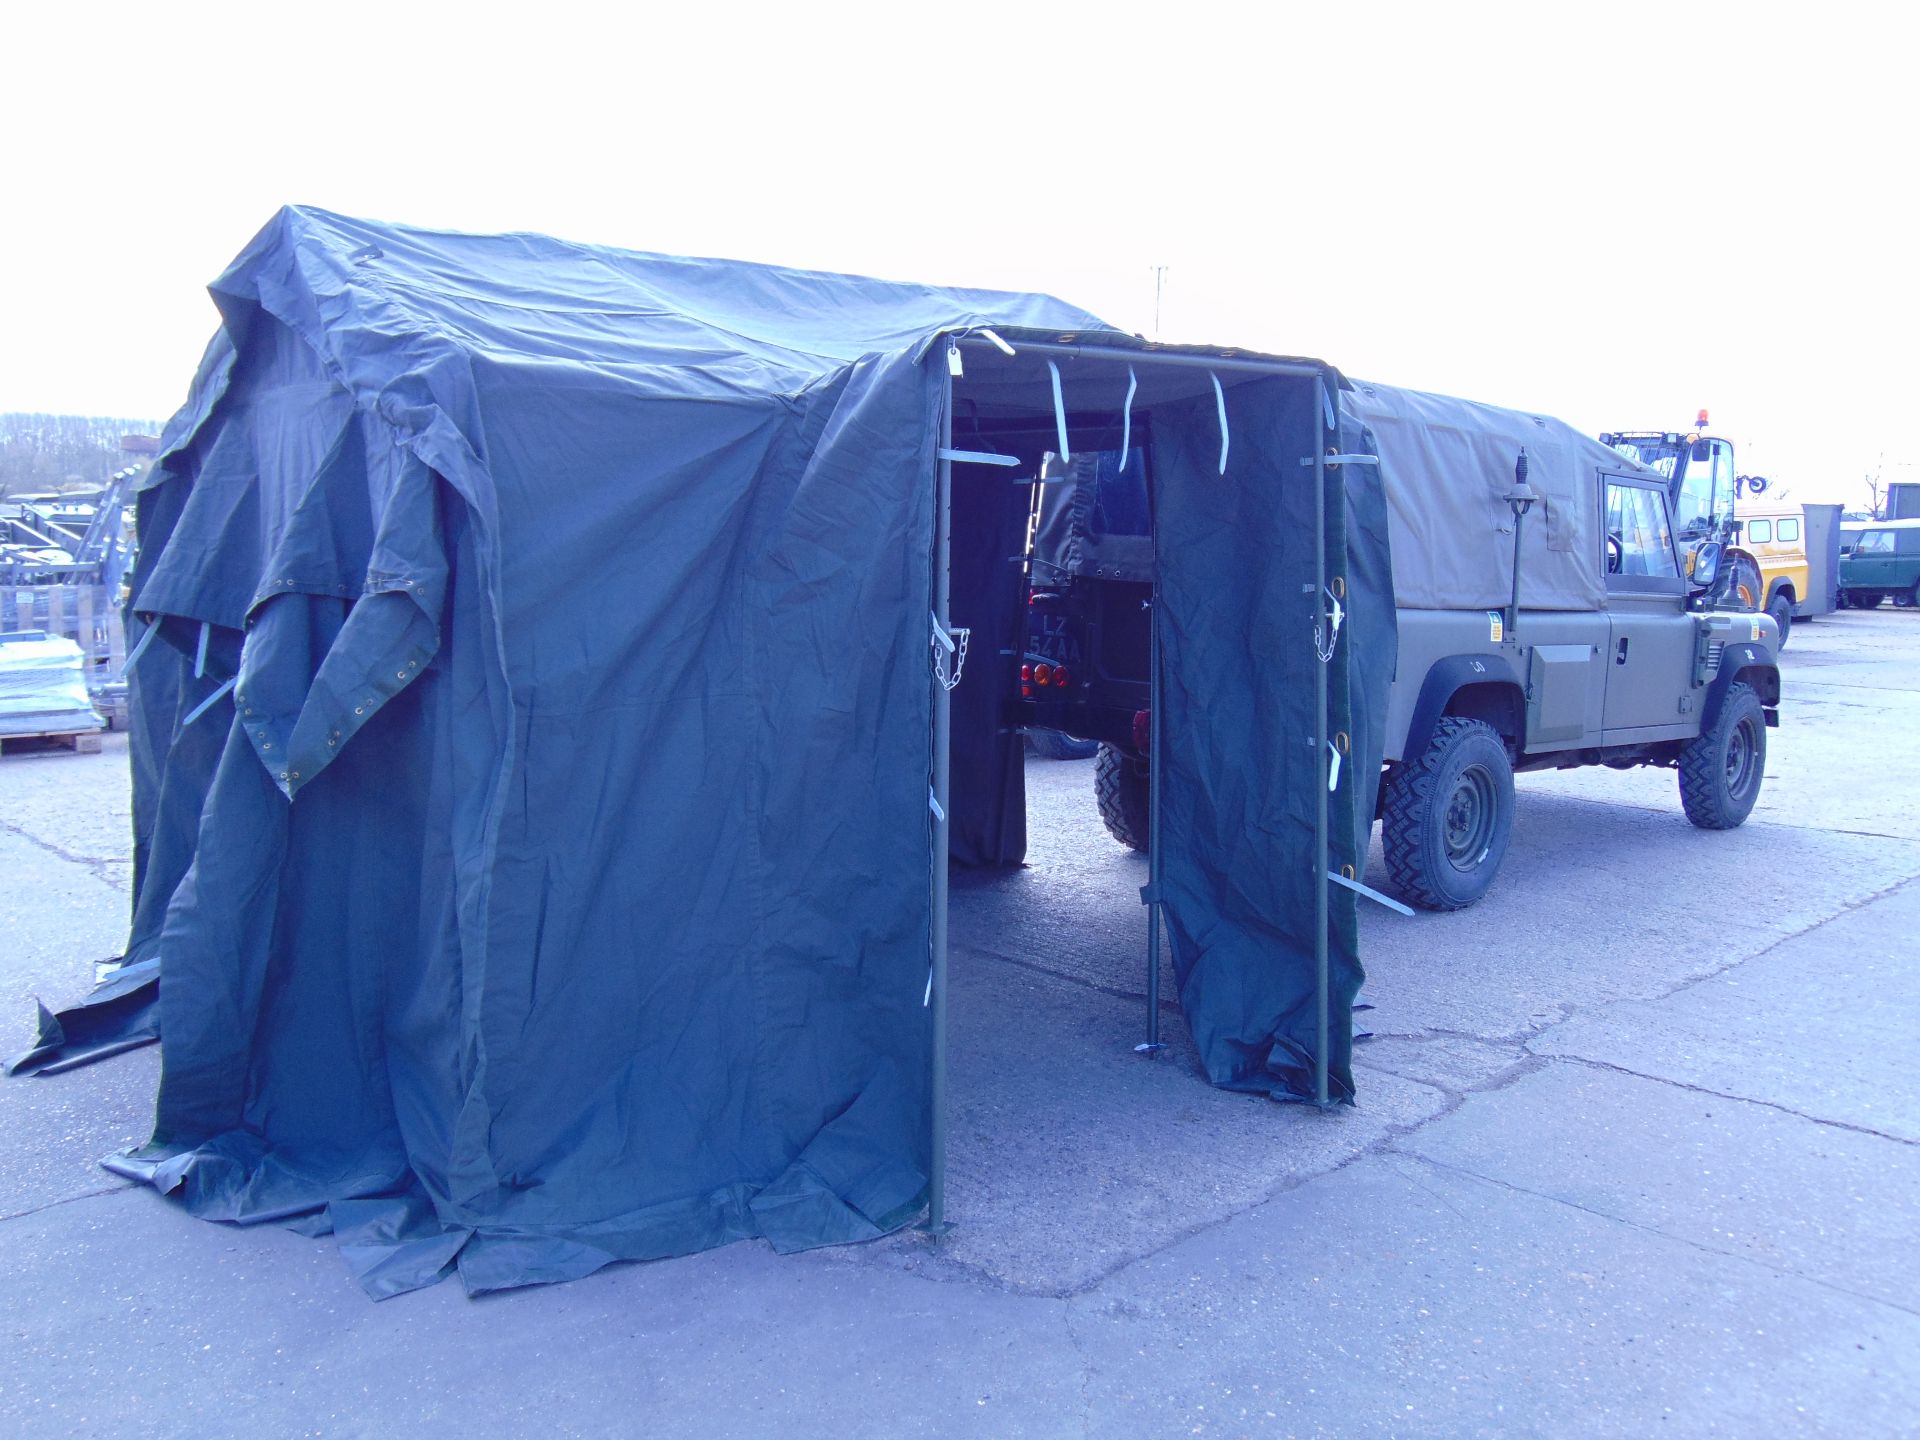 8'x8' Fv432 Closed Command/Sleeping Tent - Image 2 of 8